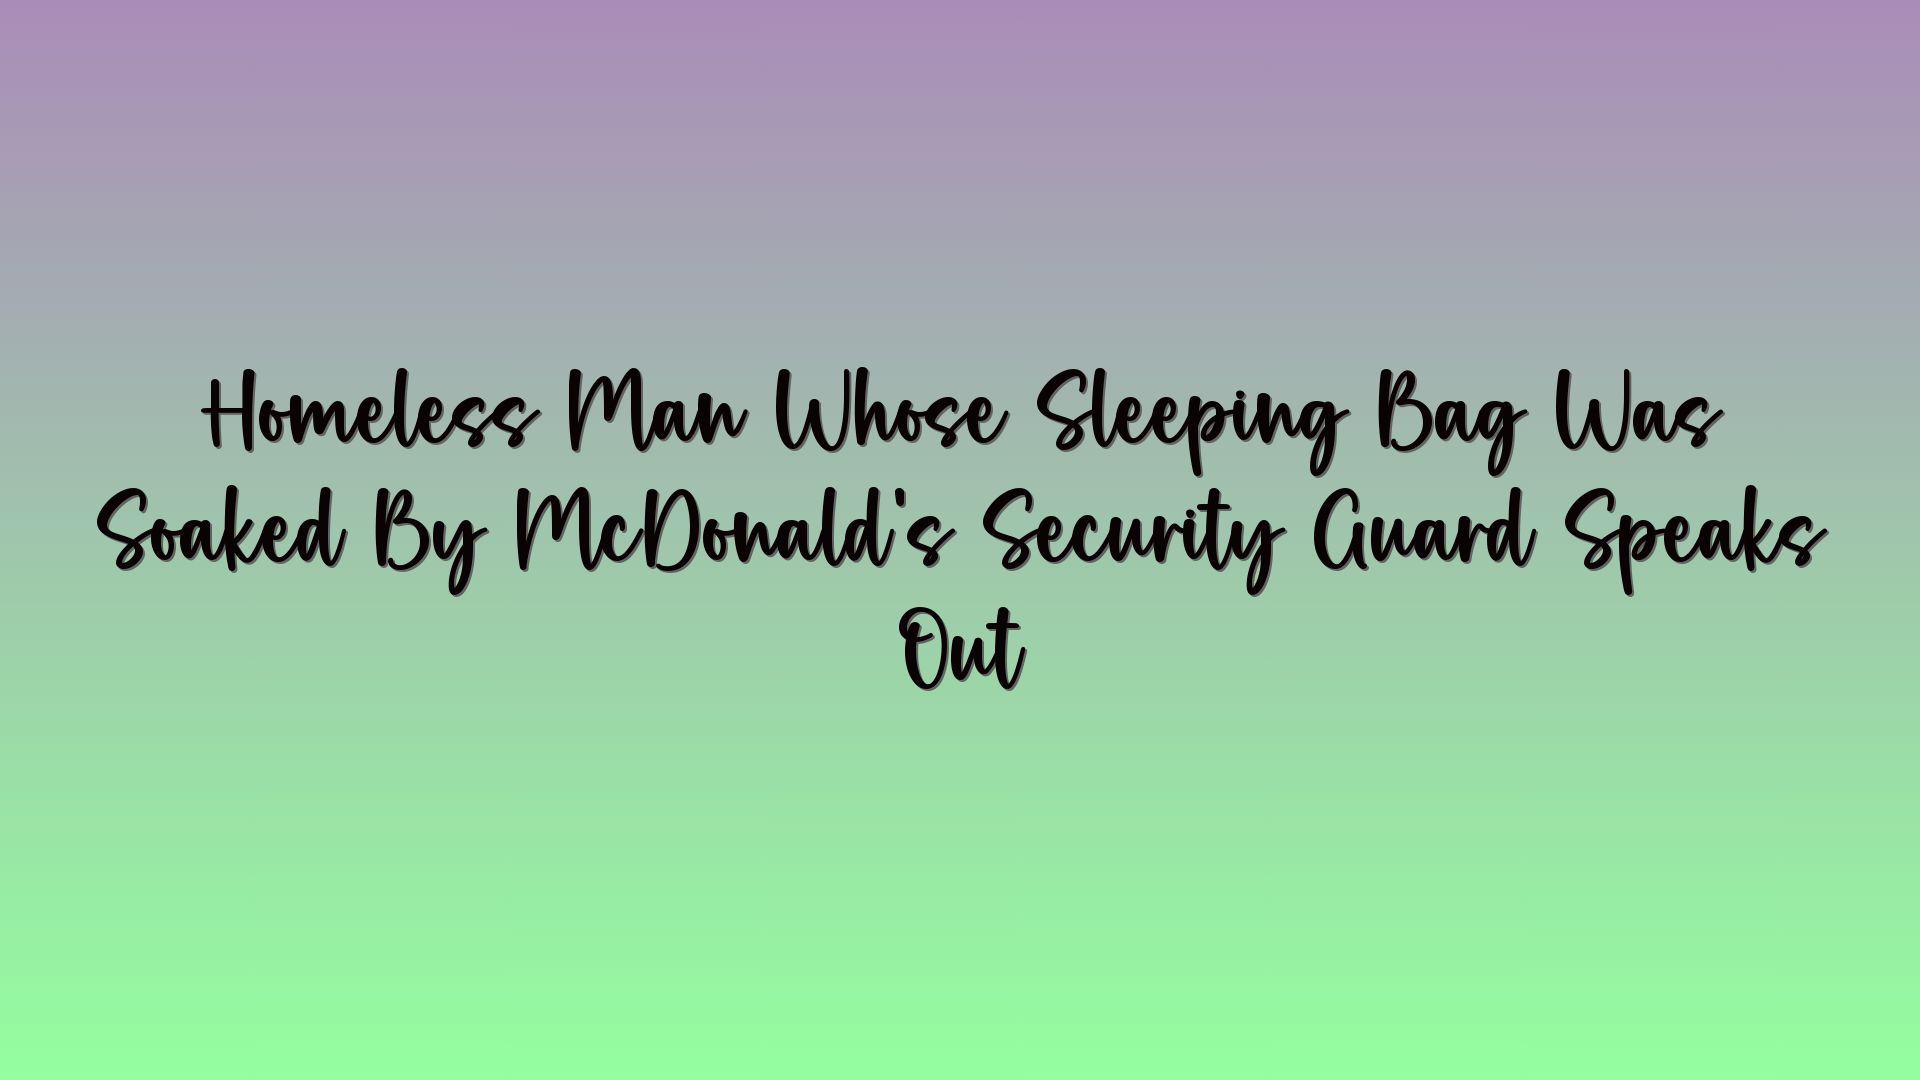 Homeless Man Whose Sleeping Bag Was Soaked By McDonald’s Security Guard Speaks Out